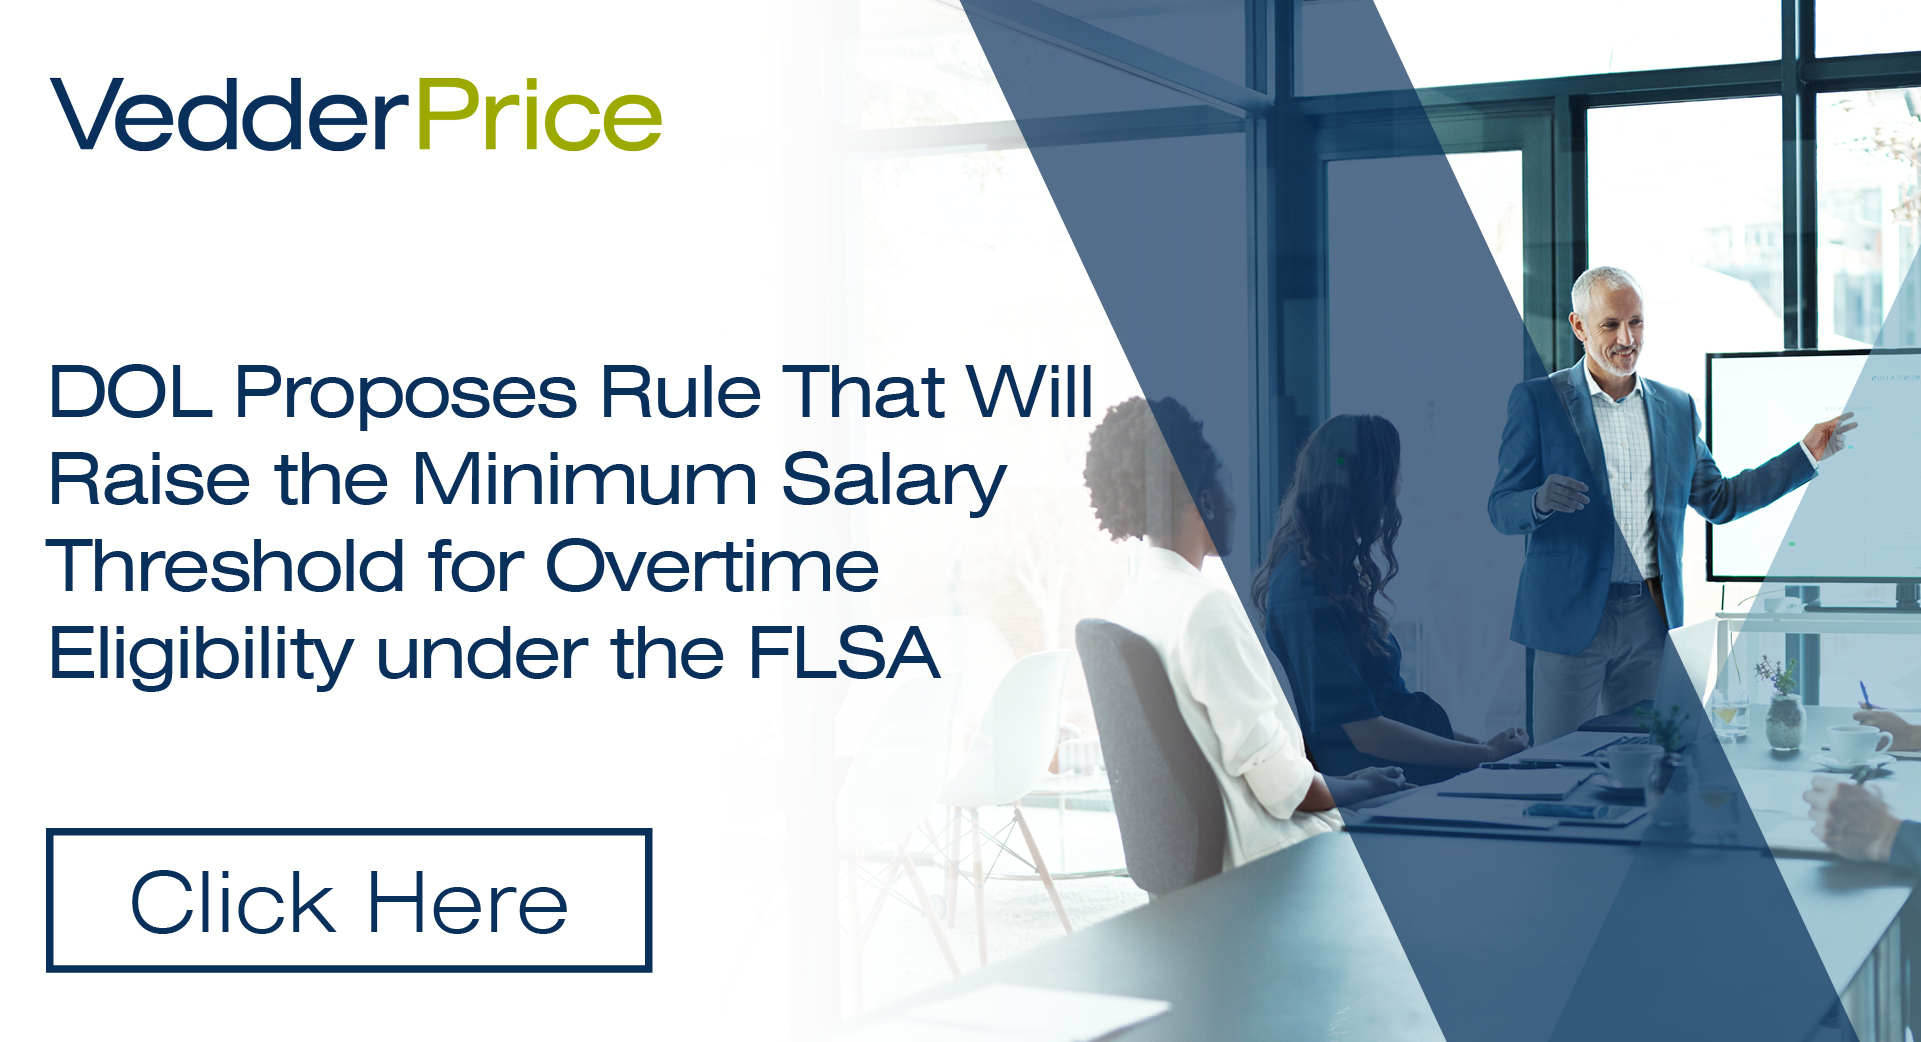 DOL Proposes Rule That Will Raise the Minimum Salary Threshold for